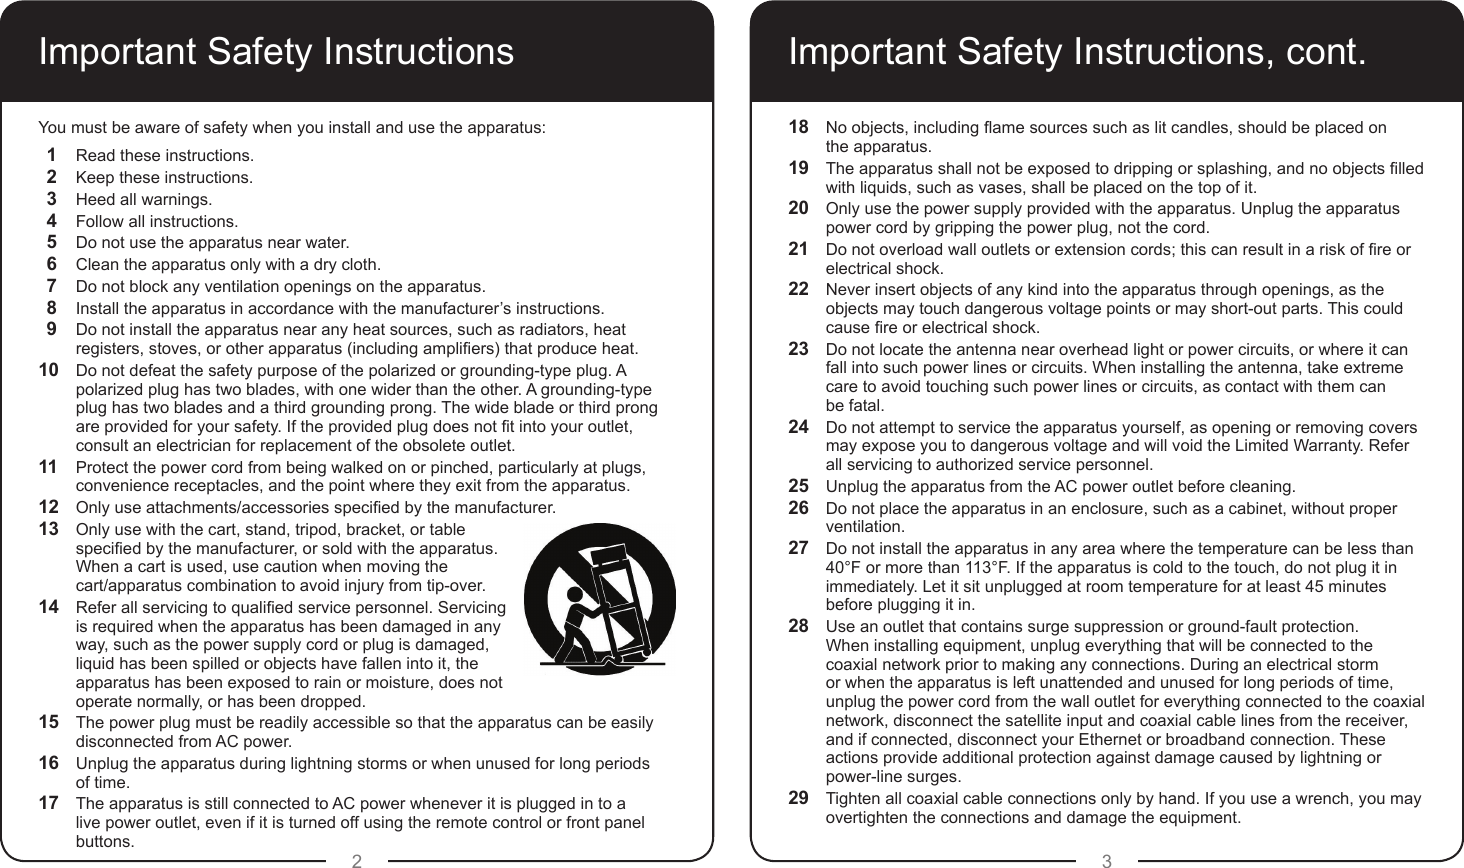 2 3Important Safety InstructionsYou must be aware of safety when you install and use the apparatus:1  Read these instructions.2  Keep these instructions.3  Heed all warnings.4  Follow all instructions.5  Do not use the apparatus near water.6  Clean the apparatus only with a dry cloth.7  Do not block any ventilation openings on the apparatus.8  Install the apparatus in accordance with the manufacturer’s instructions.9  Do not install the apparatus near any heat sources, such as radiators, heat registers, stoves, or other apparatus (including ampliers) that produce heat.10  Do not defeat the safety purpose of the polarized or grounding-type plug. A polarized plug has two blades, with one wider than the other. A grounding-type plug has two blades and a third grounding prong. The wide blade or third prong are provided for your safety. If the provided plug does not t into your outlet, consult an electrician for replacement of the obsolete outlet.11  Protect the power cord from being walked on or pinched, particularly at plugs, convenience receptacles, and the point where they exit from the apparatus.12  Only use attachments/accessories specied by the manufacturer.13  Only use with the cart, stand, tripod, bracket, or table specied by the manufacturer, or sold with the apparatus. When a cart is used, use caution when moving the  cart/apparatus combination to avoid injury from tip-over.14  Refer all servicing to qualied service personnel. Servicing is required when the apparatus has been damaged in any way, such as the power supply cord or plug is damaged, liquid has been spilled or objects have fallen into it, the apparatus has been exposed to rain or moisture, does not operate normally, or has been dropped.15  The power plug must be readily accessible so that the apparatus can be easily disconnected from AC power. 16  Unplug the apparatus during lightning storms or when unused for long periods  of time.17  The apparatus is still connected to AC power whenever it is plugged in to a live power outlet, even if it is turned off using the remote control or front panel buttons.Important Safety Instructions, cont.18  No objects, including ame sources such as lit candles, should be placed on  the apparatus.19  The apparatus shall not be exposed to dripping or splashing, and no objects lled with liquids, such as vases, shall be placed on the top of it.20  Only use the power supply provided with the apparatus. Unplug the apparatus power cord by gripping the power plug, not the cord.21  Do not overload wall outlets or extension cords; this can result in a risk of re or electrical shock.22  Never insert objects of any kind into the apparatus through openings, as the objects may touch dangerous voltage points or may short-out parts. This could cause re or electrical shock.23  Do not locate the antenna near overhead light or power circuits, or where it can fall into such power lines or circuits. When installing the antenna, take extreme care to avoid touching such power lines or circuits, as contact with them can  be fatal.24  Do not attempt to service the apparatus yourself, as opening or removing covers may expose you to dangerous voltage and will void the Limited Warranty. Refer all servicing to authorized service personnel.25  Unplug the apparatus from the AC power outlet before cleaning.26  Do not place the apparatus in an enclosure, such as a cabinet, without proper ventilation.27  Do not install the apparatus in any area where the temperature can be less than 40°F or more than 113°F. If the apparatus is cold to the touch, do not plug it in immediately. Let it sit unplugged at room temperature for at least 45 minutes before plugging it in.28  Use an outlet that contains surge suppression or ground-fault protection.  When installing equipment, unplug everything that will be connected to the coaxial network prior to making any connections. During an electrical storm or when the apparatus is left unattended and unused for long periods of time, unplug the power cord from the wall outlet for everything connected to the coaxial network, disconnect the satellite input and coaxial cable lines from the receiver, and if connected, disconnect your Ethernet or broadband connection. These actions provide additional protection against damage caused by lightning or power-line surges.29  Tighten all coaxial cable connections only by hand. If you use a wrench, you may overtighten the connections and damage the equipment.